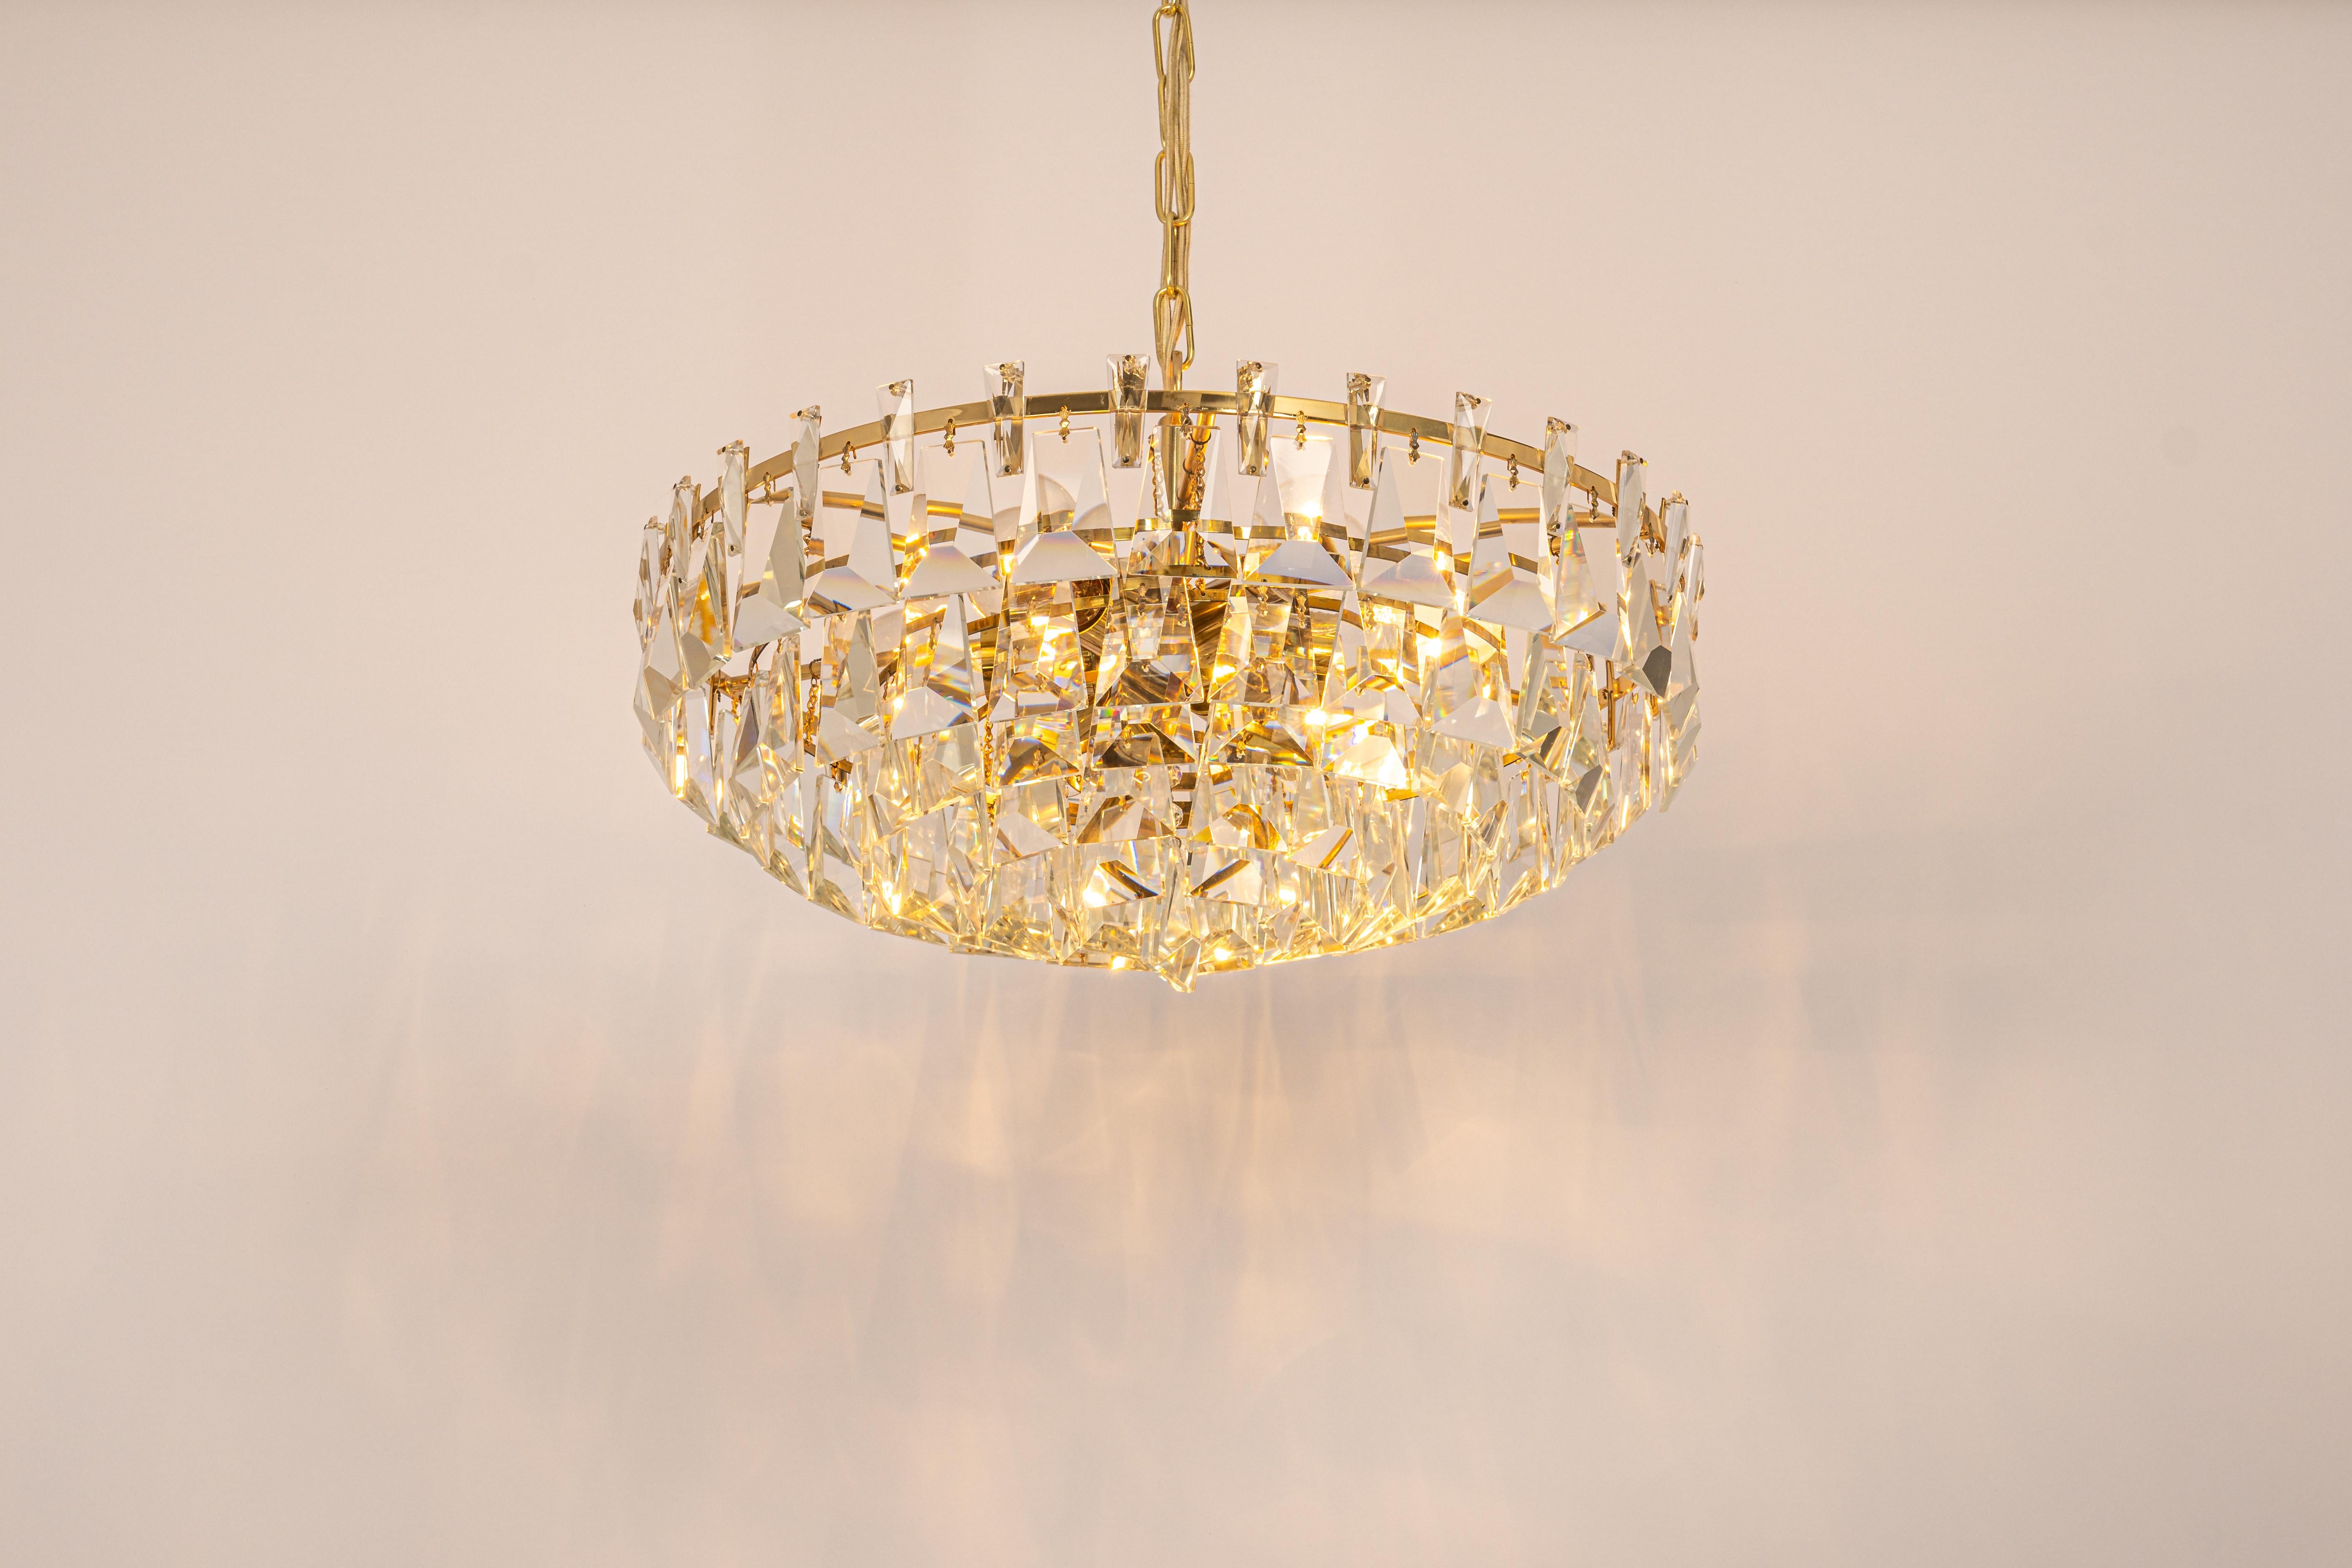 Large Gilt Brass and Crystal Chandelier, by Palwa, Germany, 1970s For Sale 1